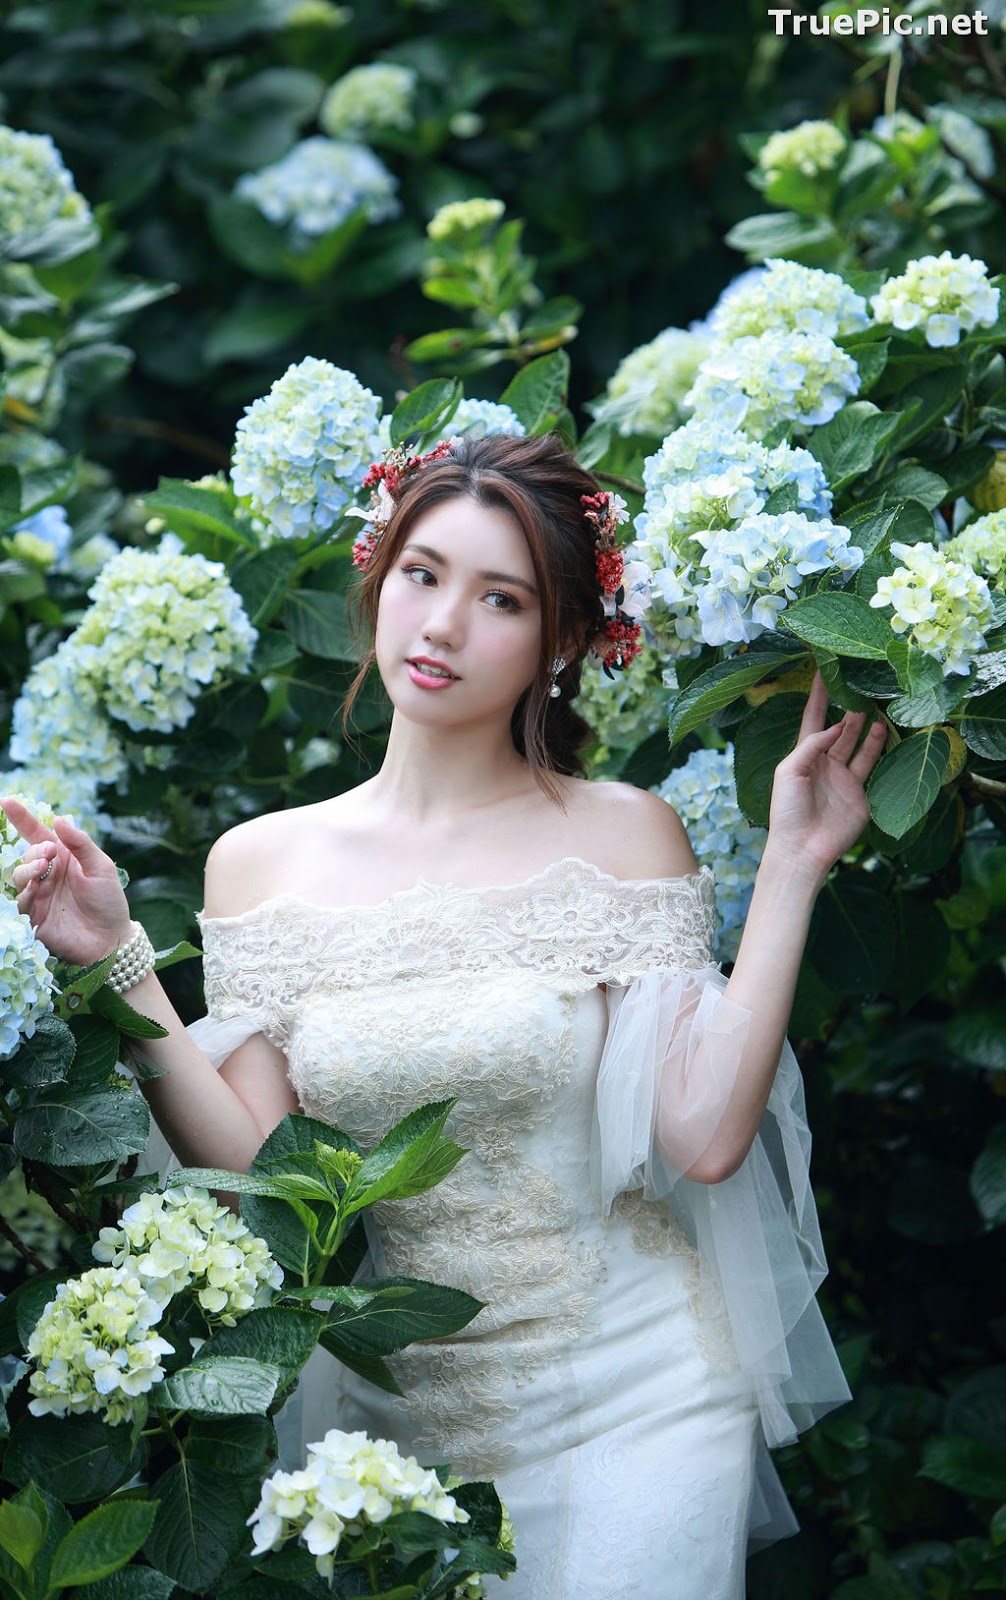 Image Taiwanese Model - 張倫甄 - Beautiful Bride and Hydrangea Flowers - TruePic.net - Picture-62